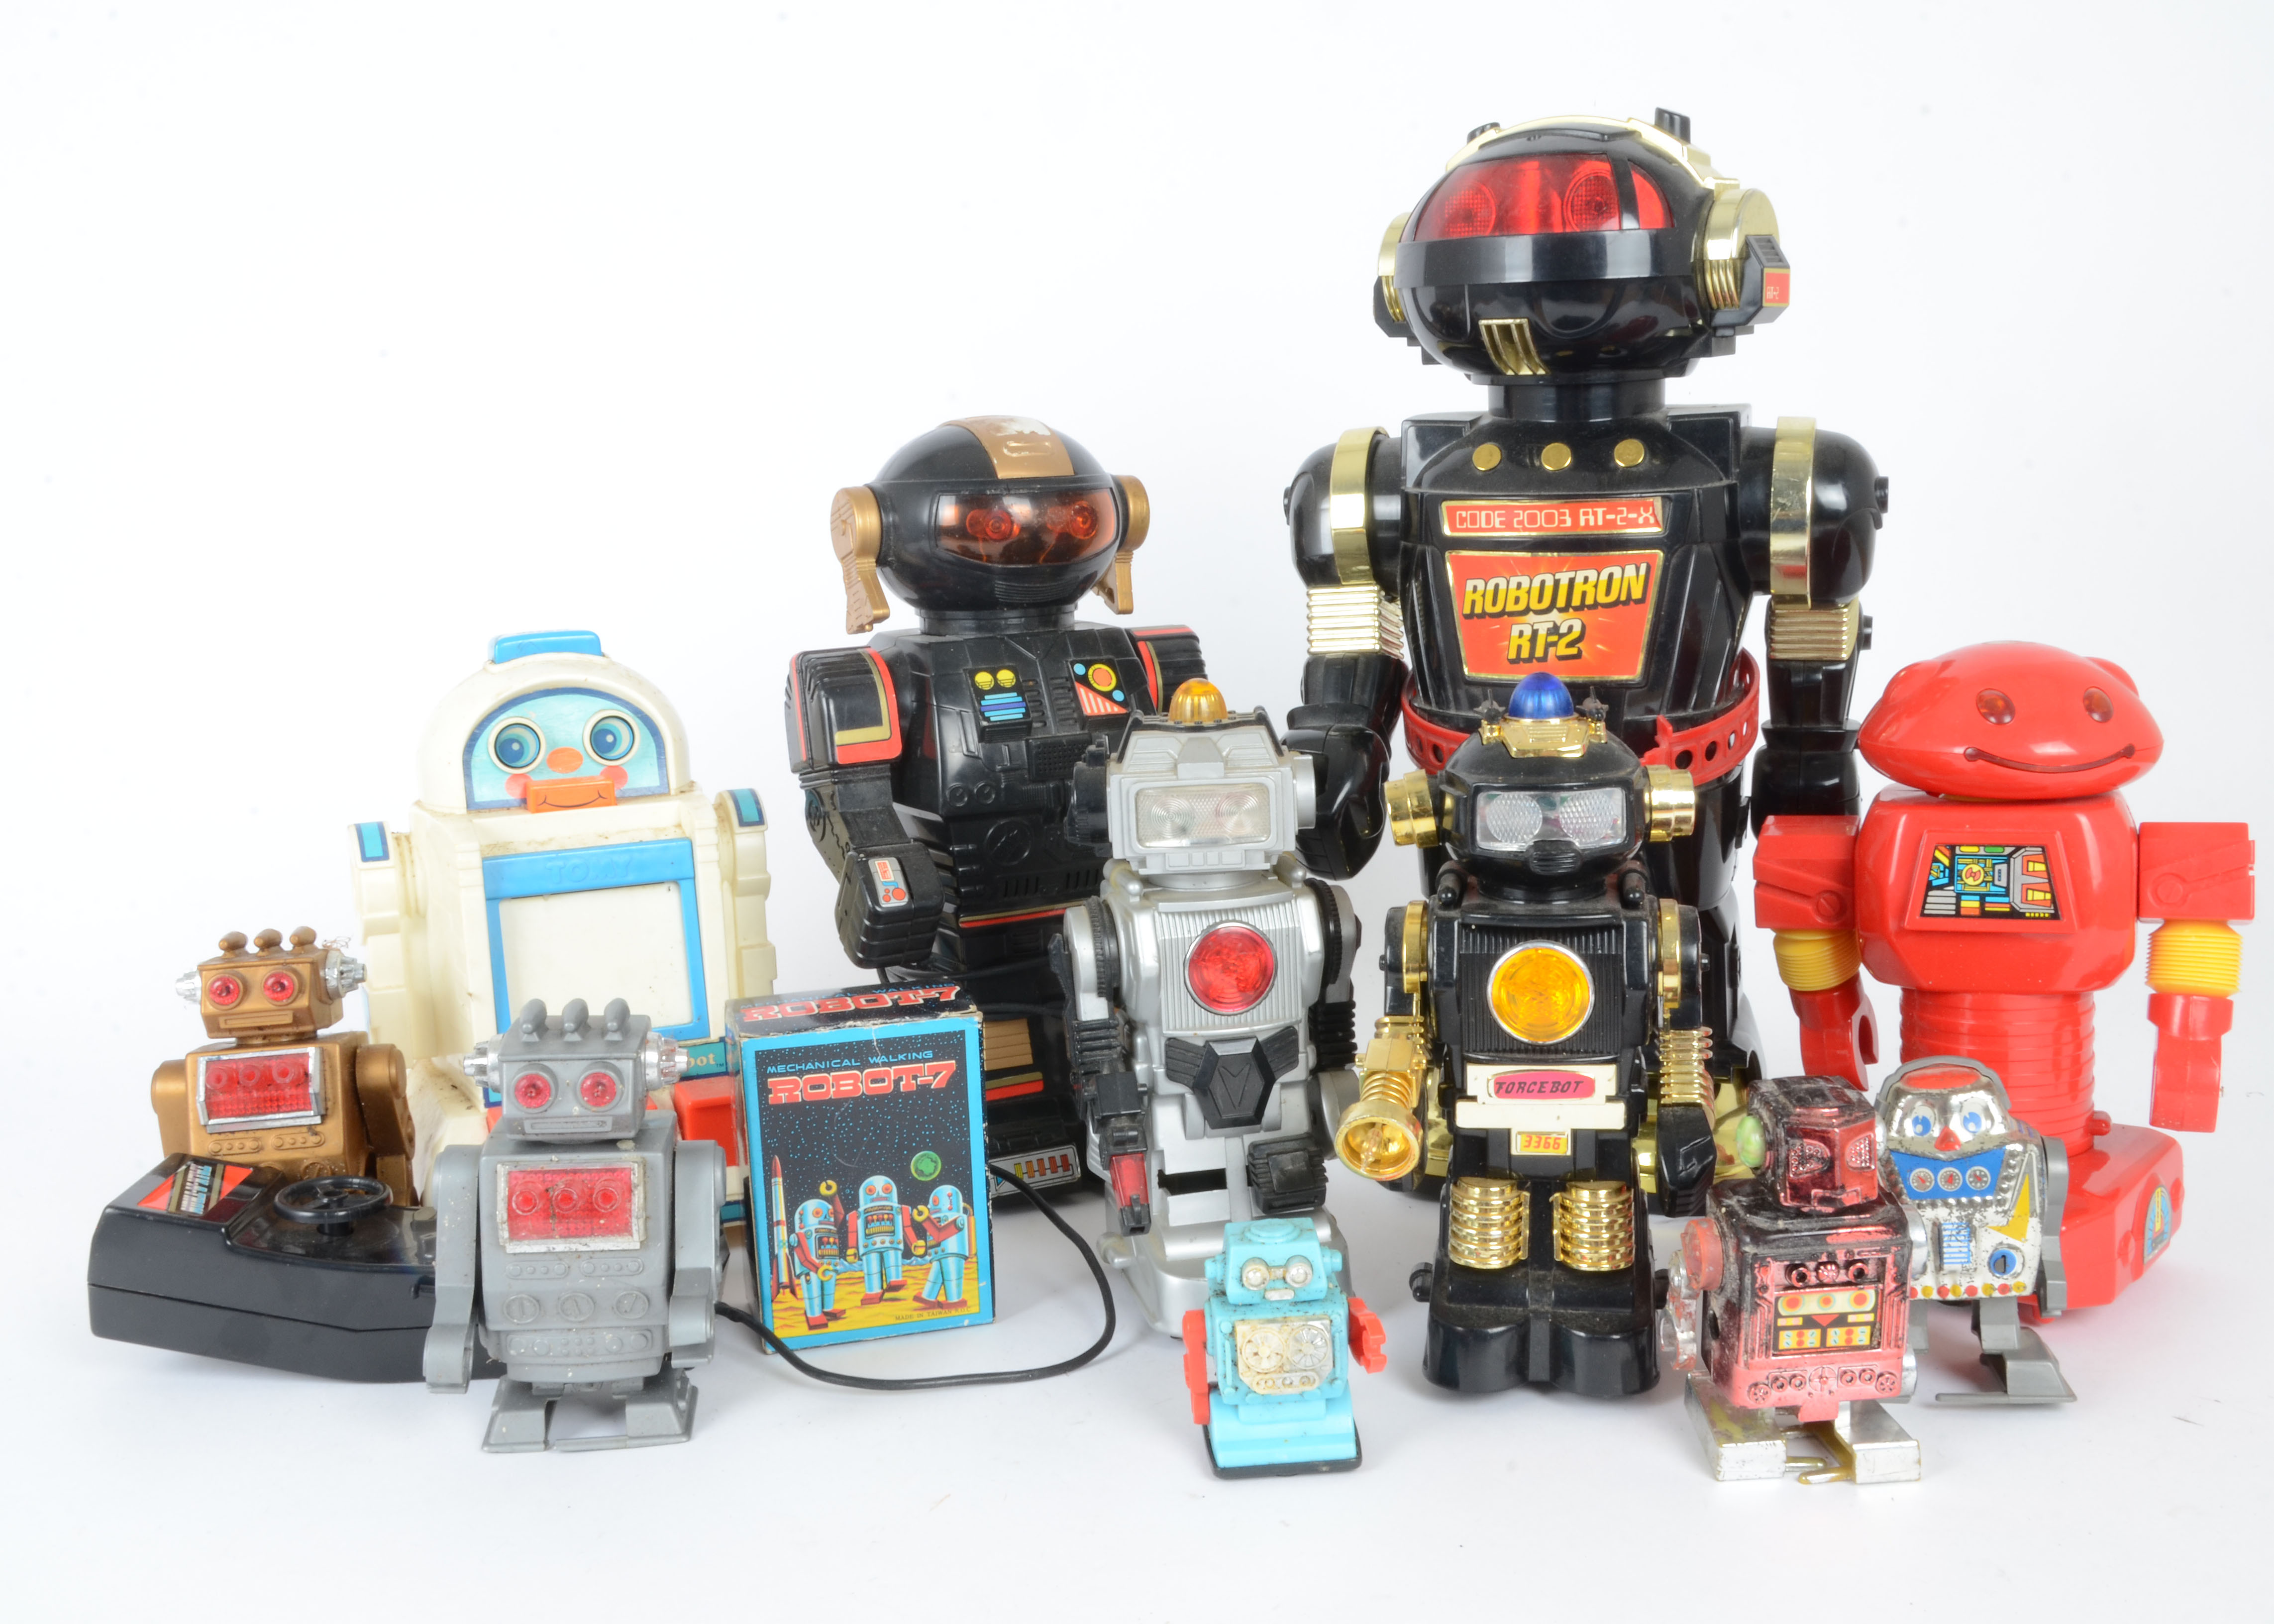 Collection of unboxed plastic Robots by various makers, including New Bright Robotron RT-2, Chines